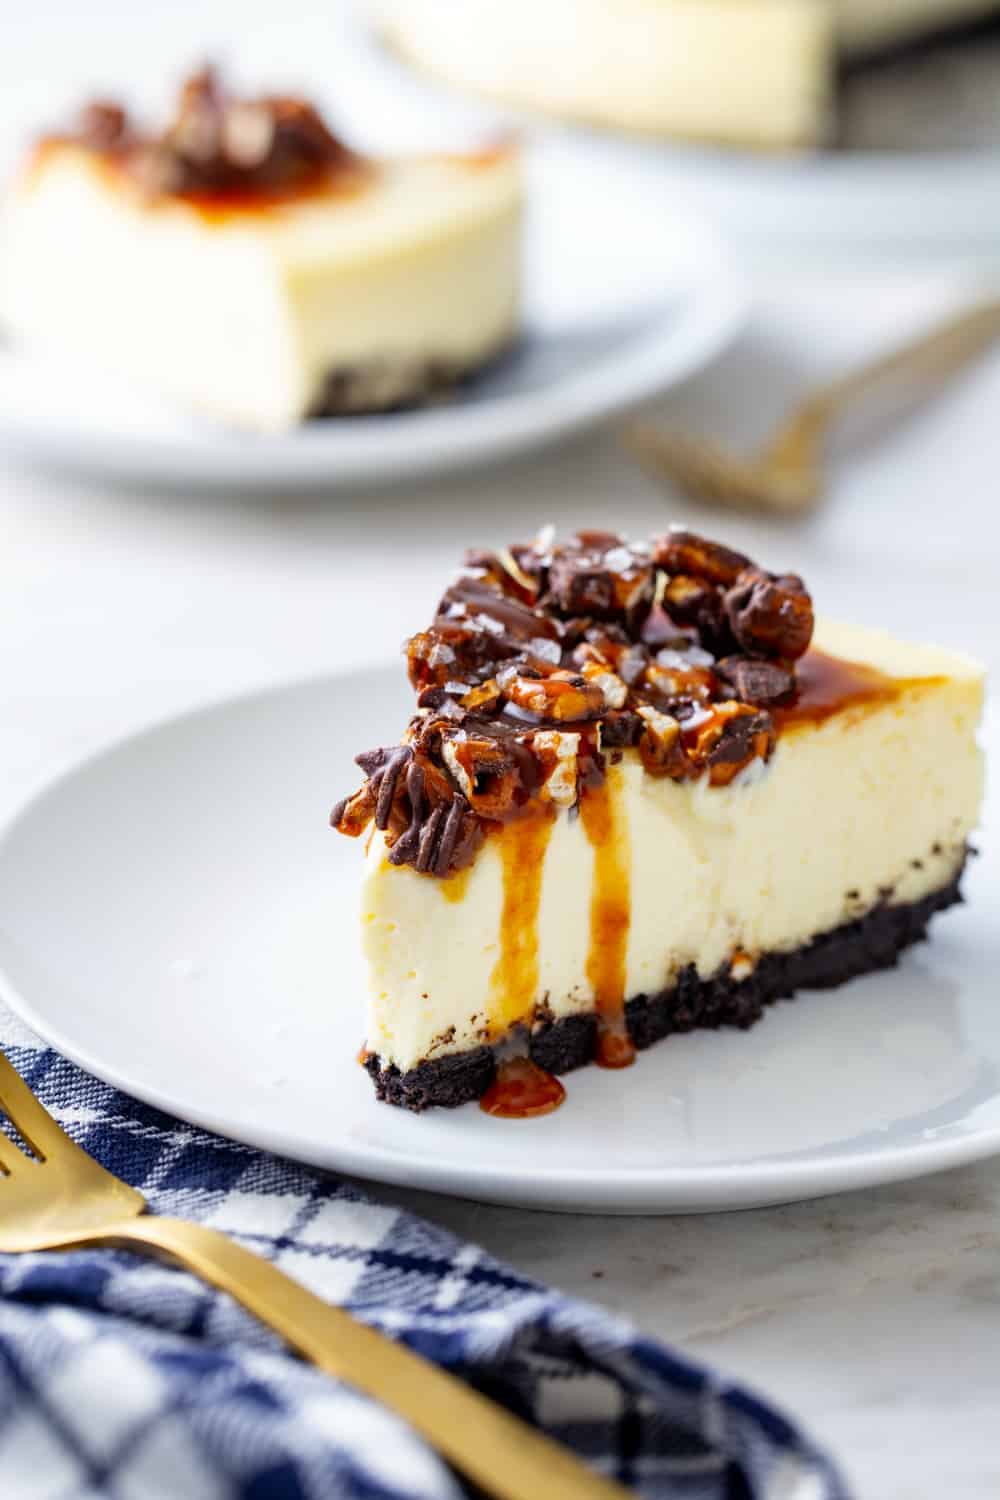 Plated slices of sweet and salty cheesecake